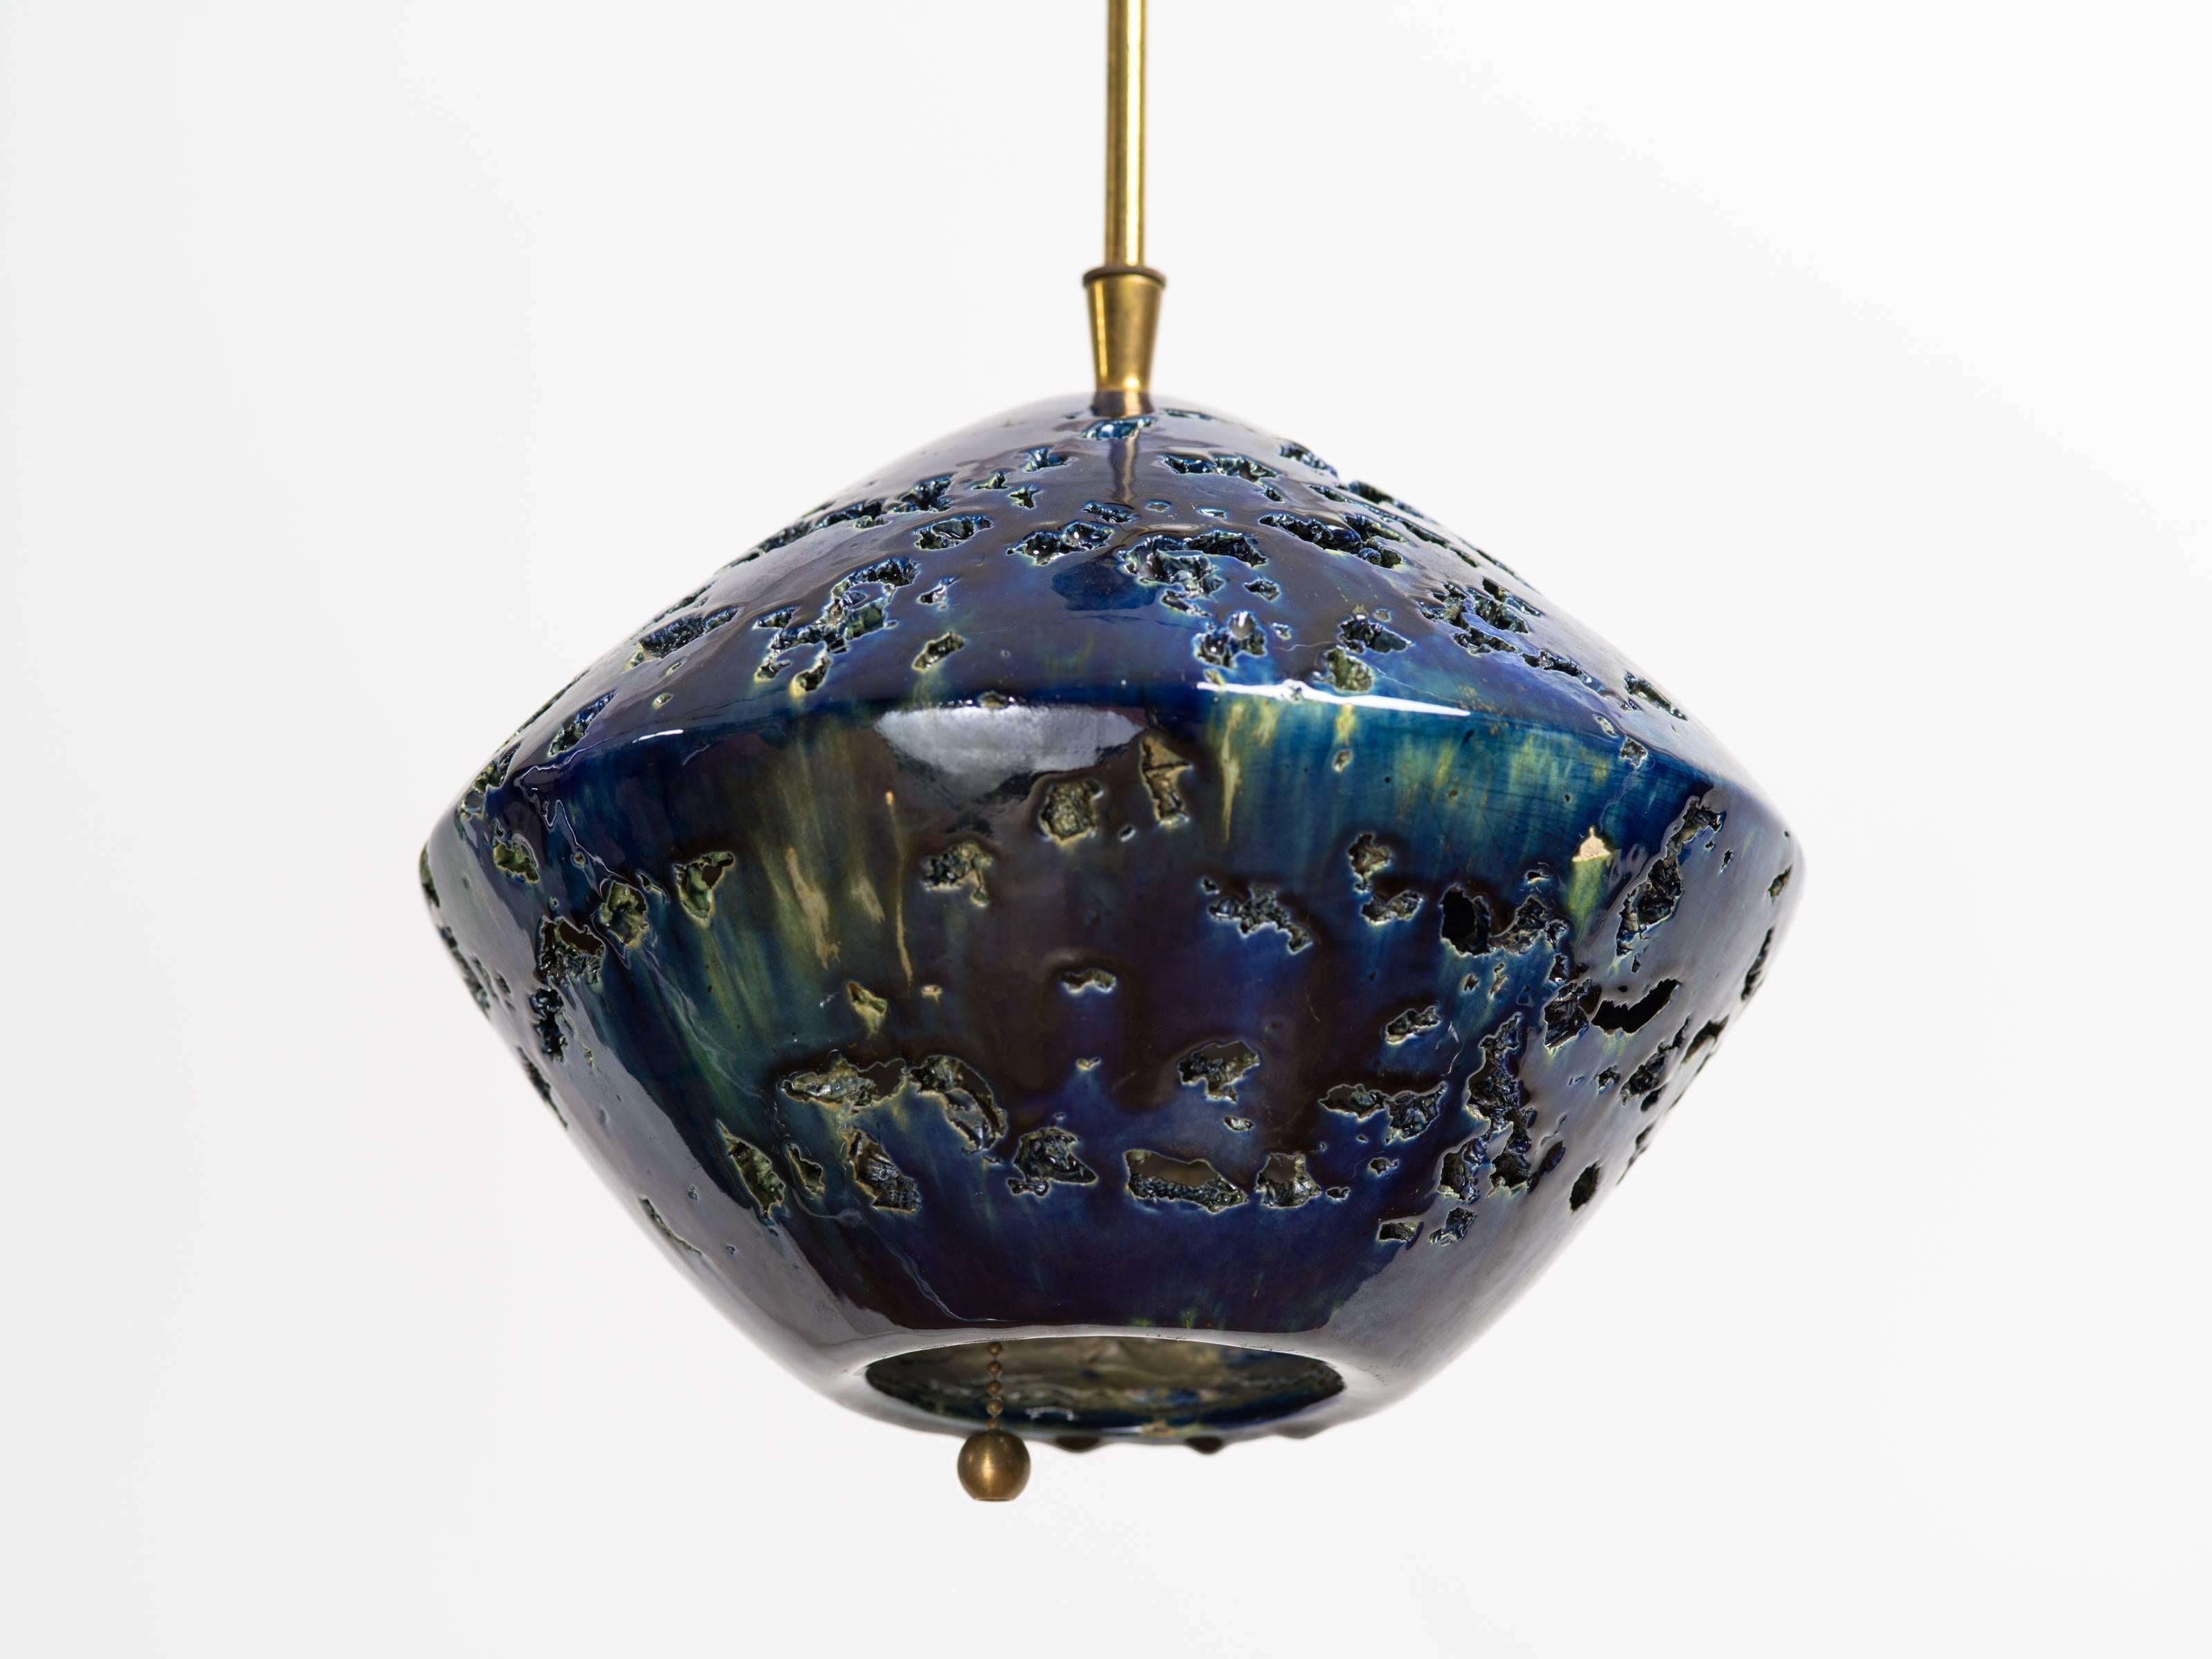 Italian 1960s Brutalist cut-out and glazed indigo ceramic sphere chandelier, with pull chain. Original brass rod and ceiling cap.